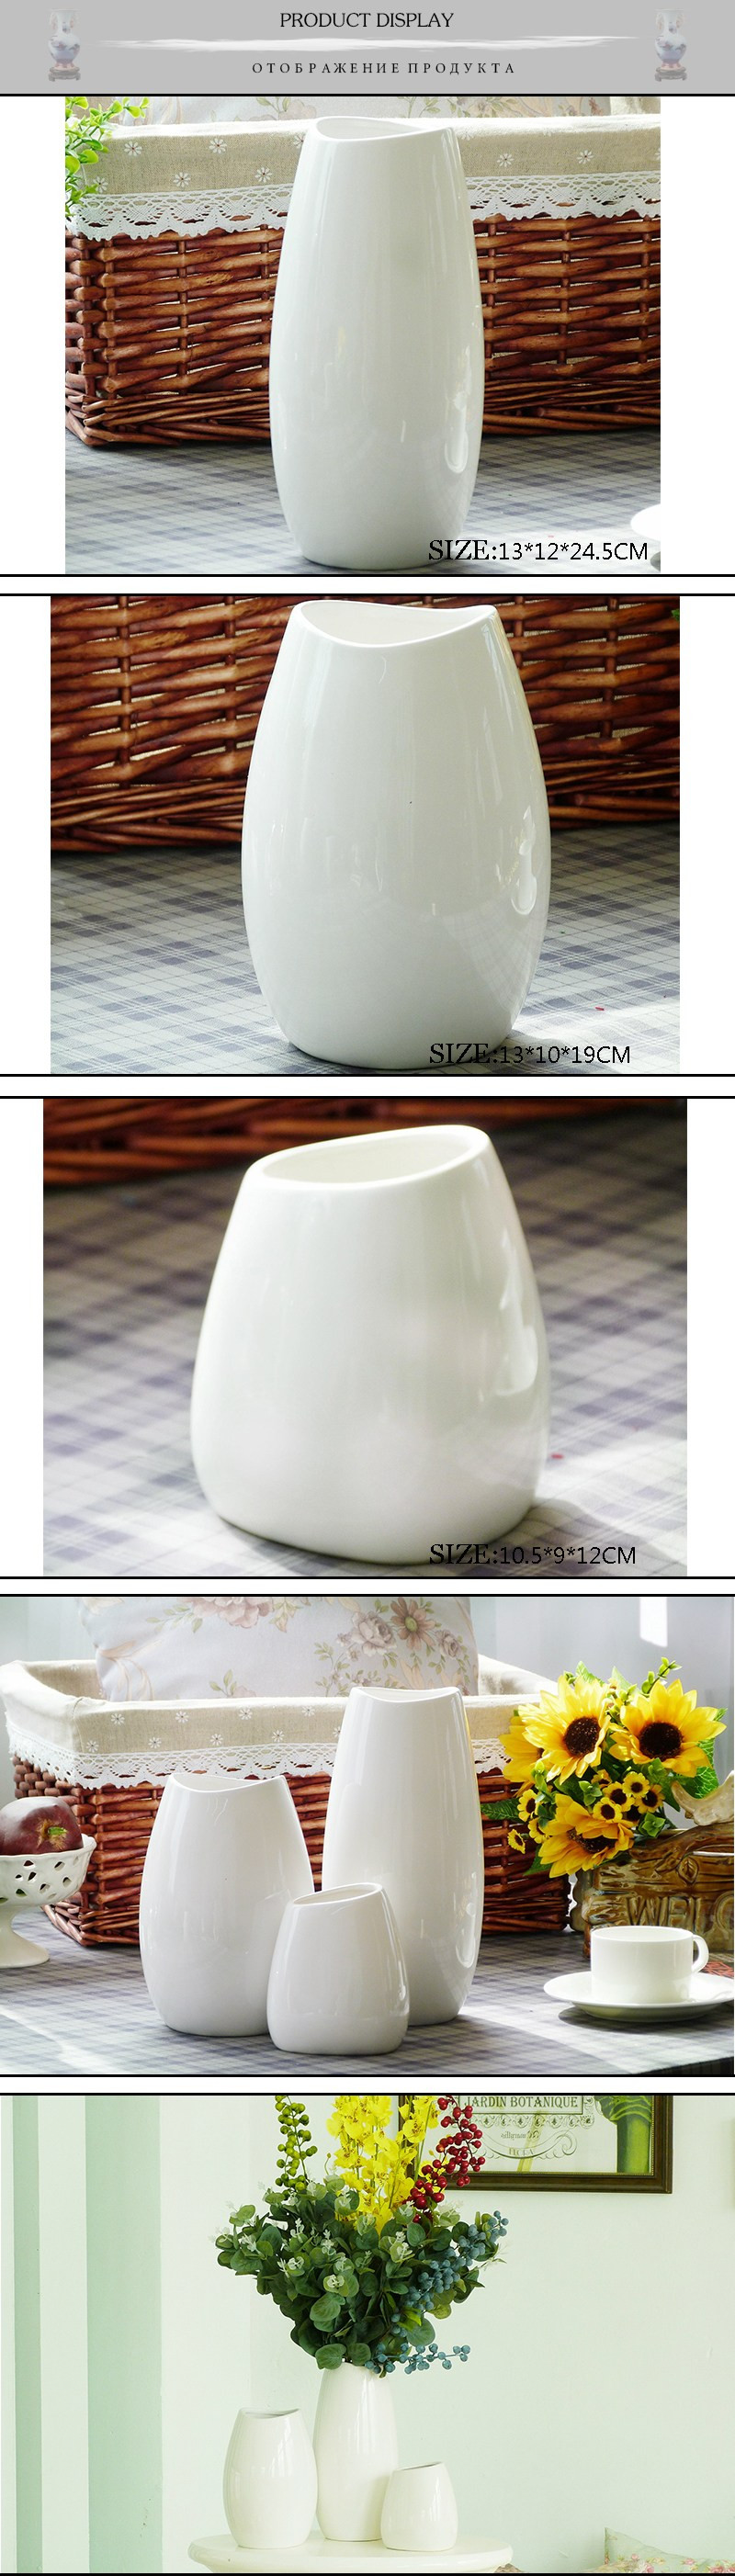 Small Decorative Stones for Vases Of A§classic Crafts White Porcelain Vase Modern Desktop Small Vase within Classic Crafts White Porcelain Vase Modern Desktop Small Vase Creative Home Decoration Gifts Ulknn